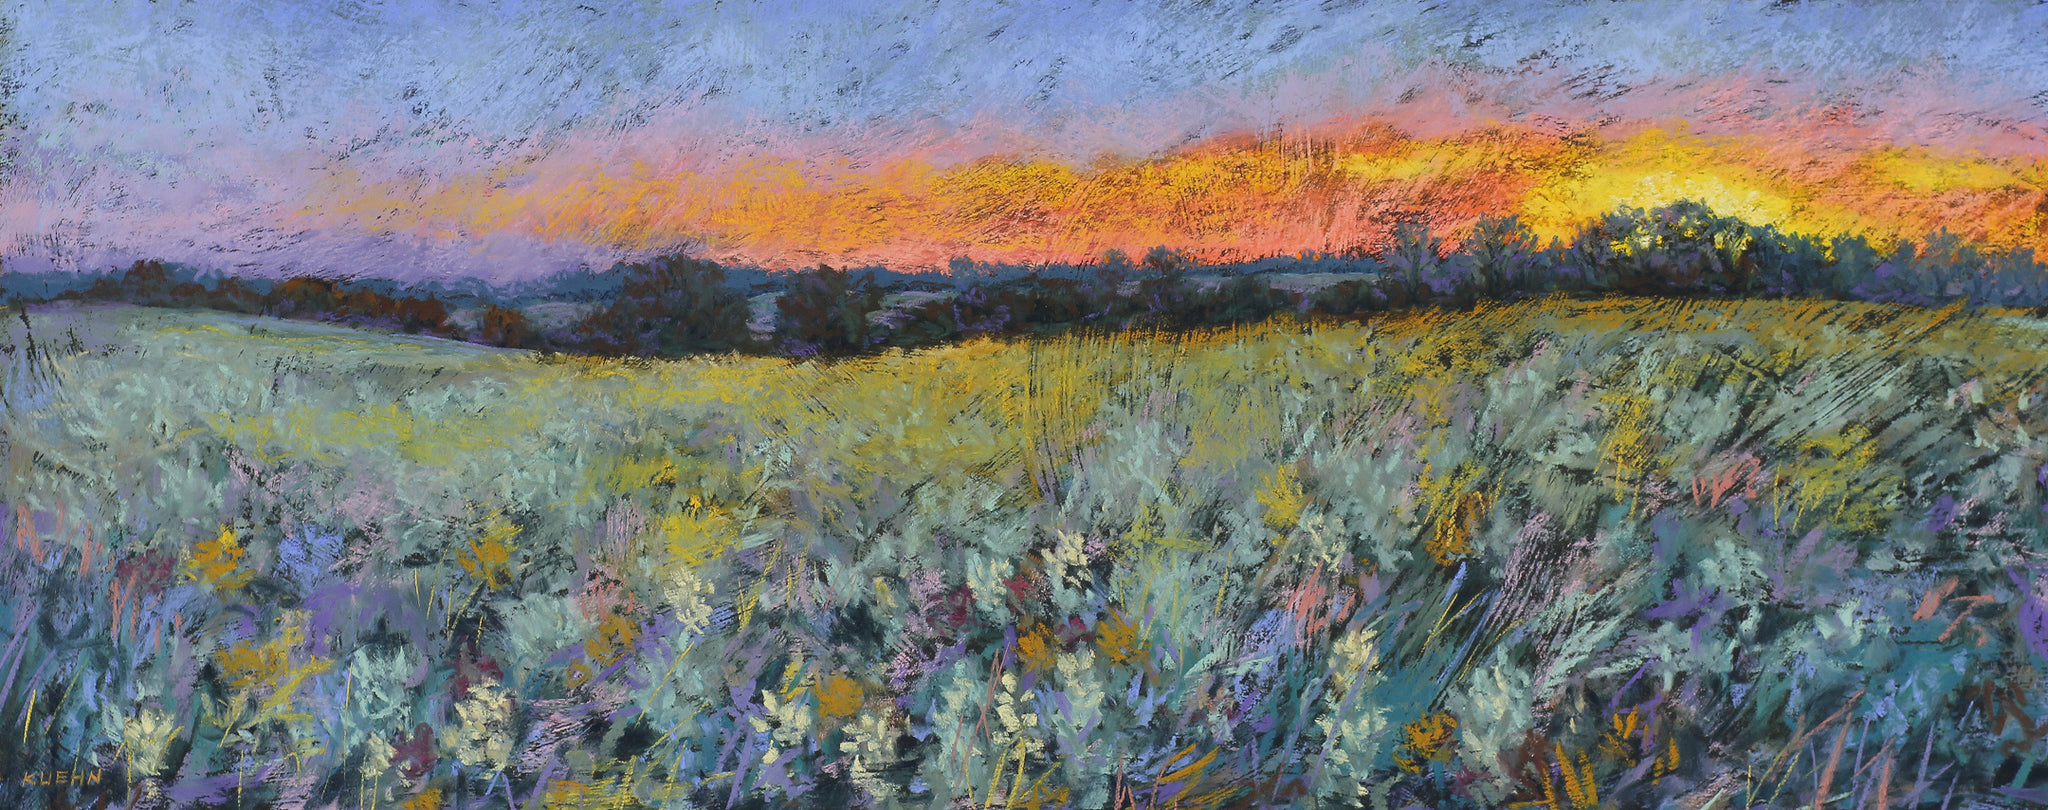 "PRAIRIE FLOWERS" Limited Edition Giclee Print